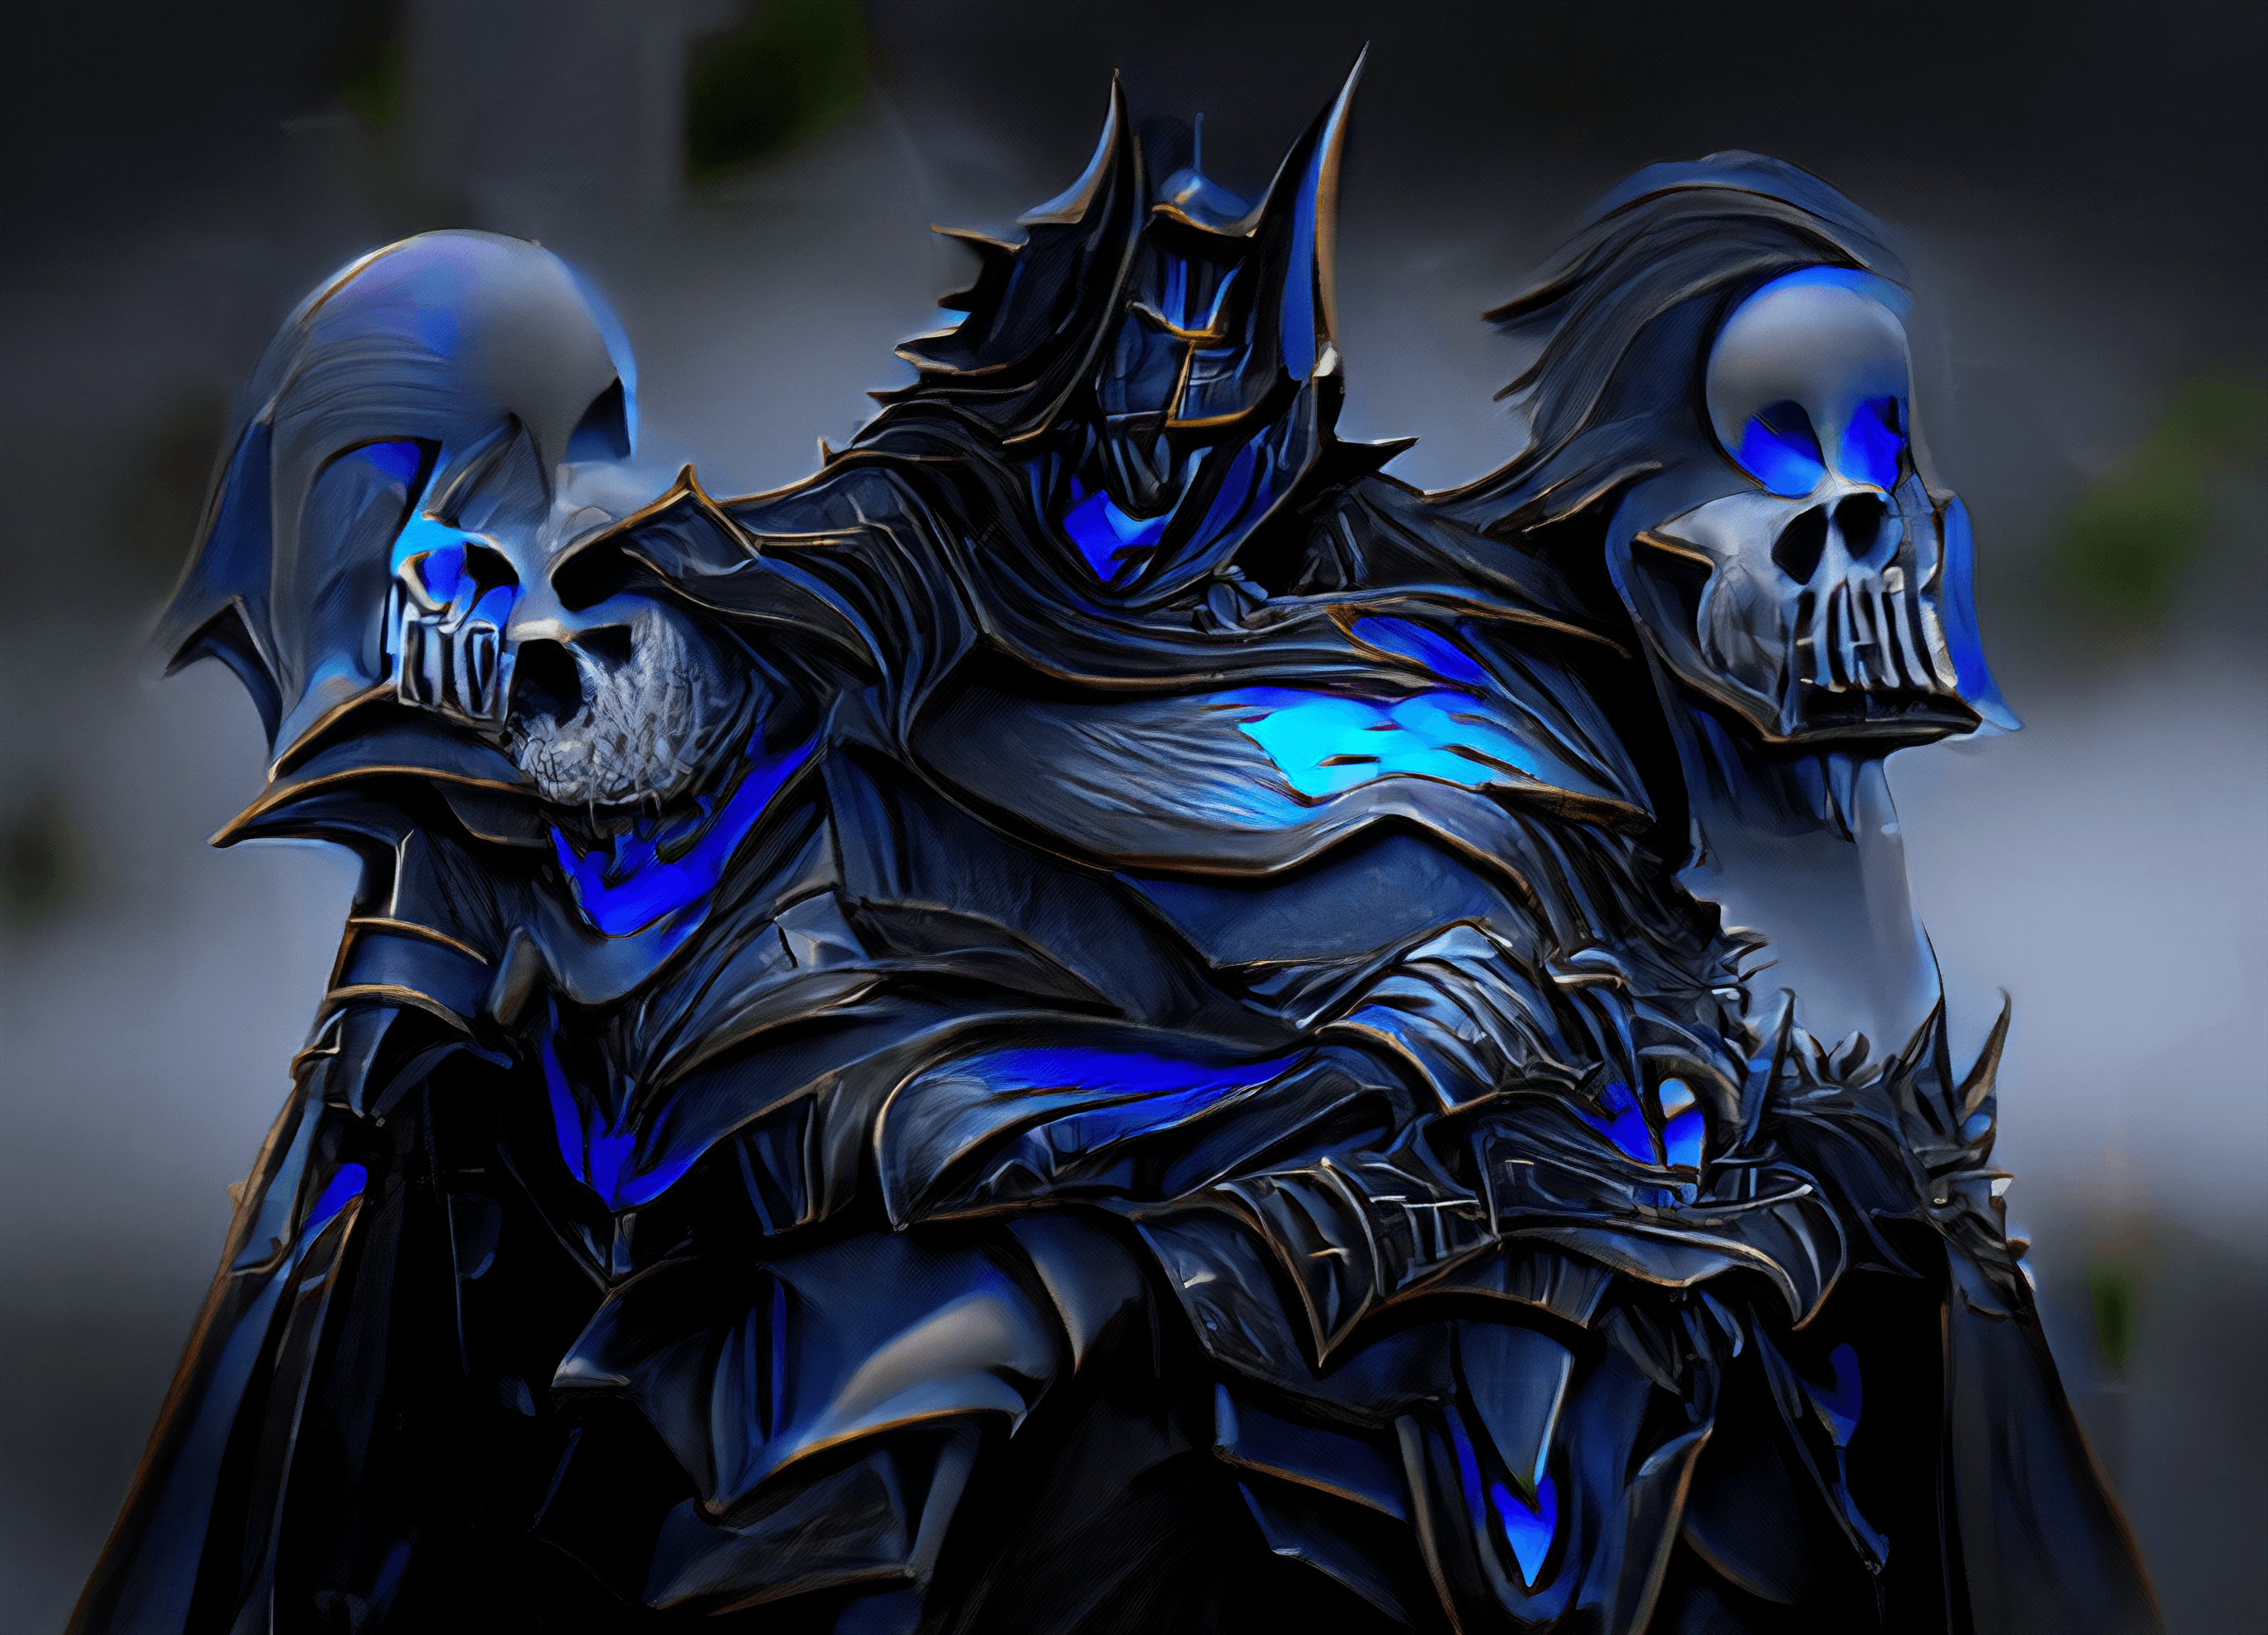 The Death Knight